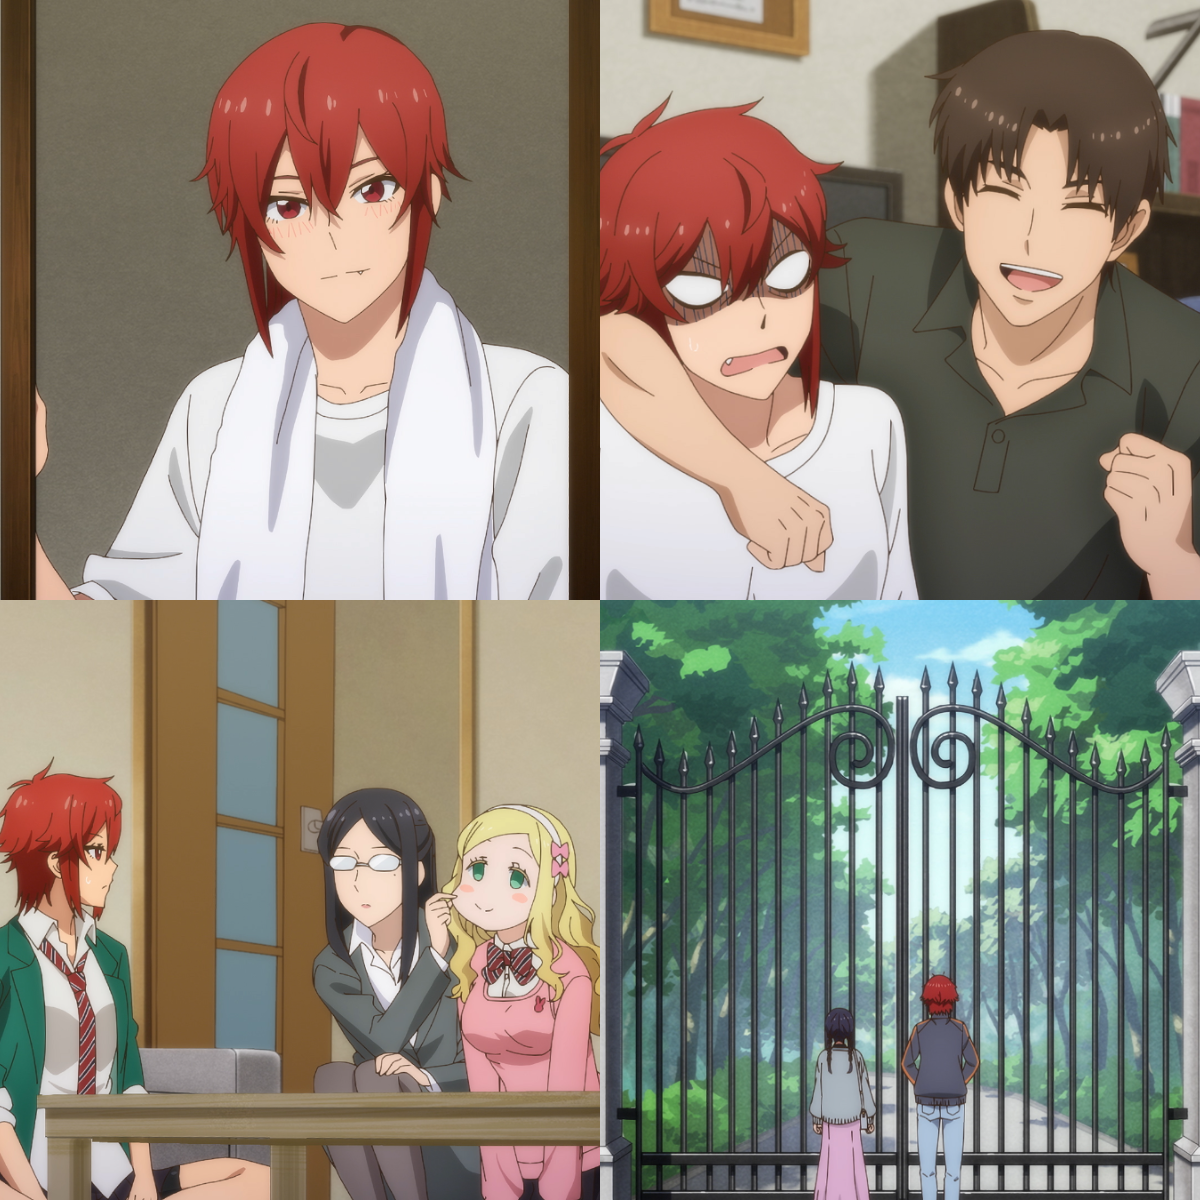 Tomo-chan is a Girl episode 5 release time, trailer shared online